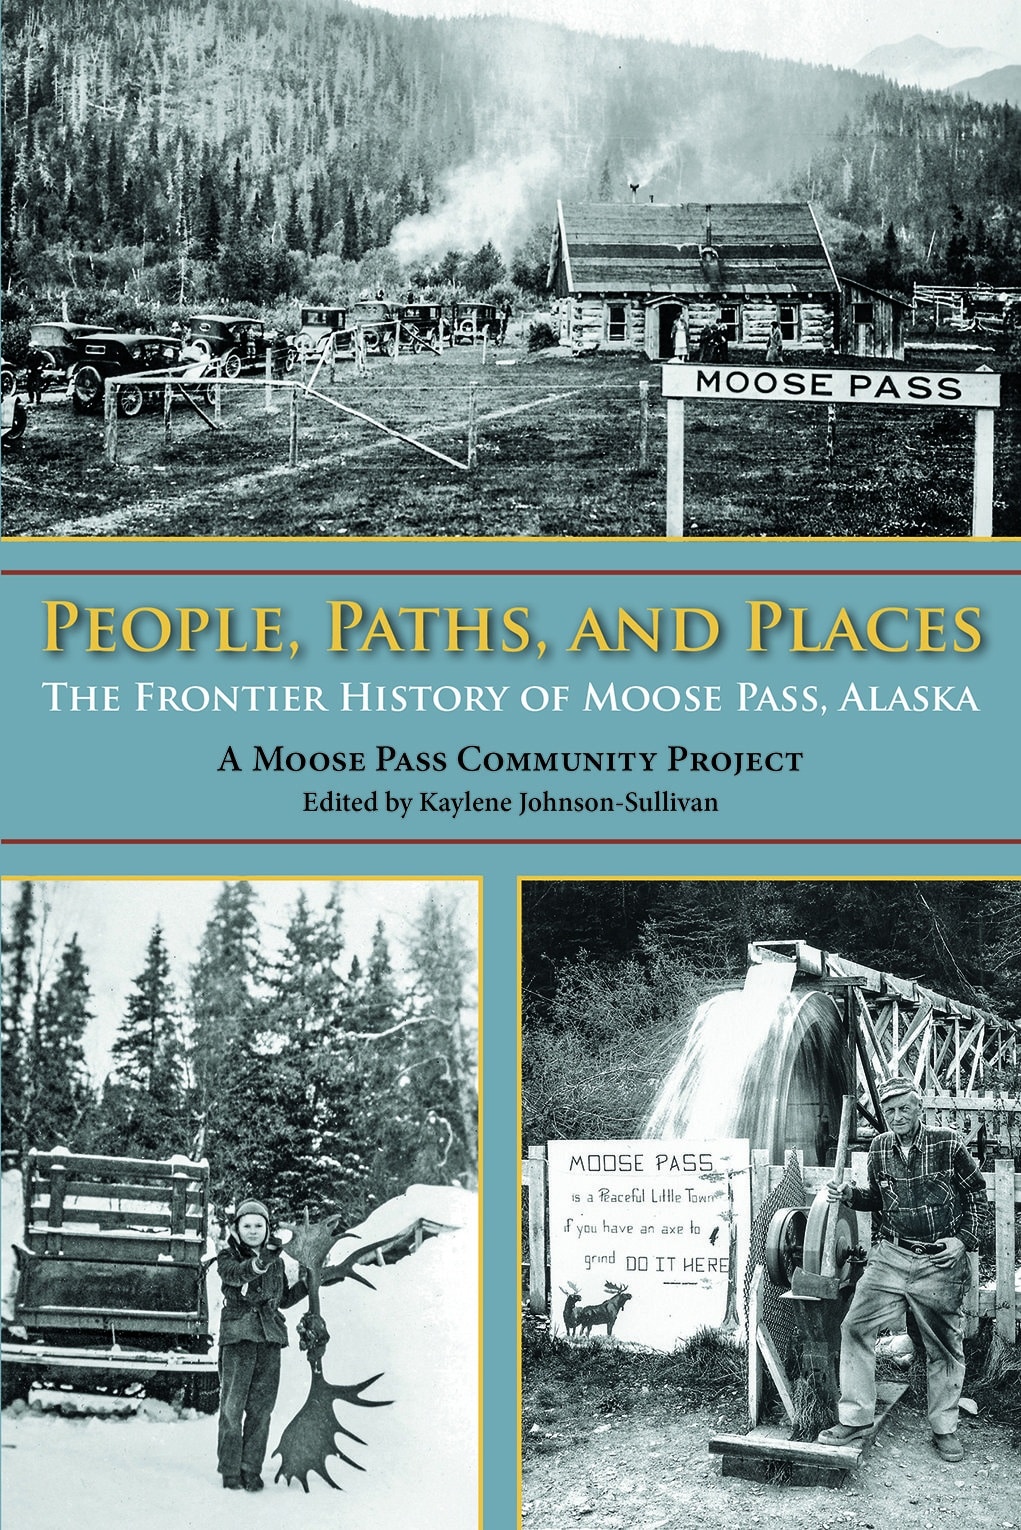 The Fronteir History of Moose Pass, Alaska Book Cover